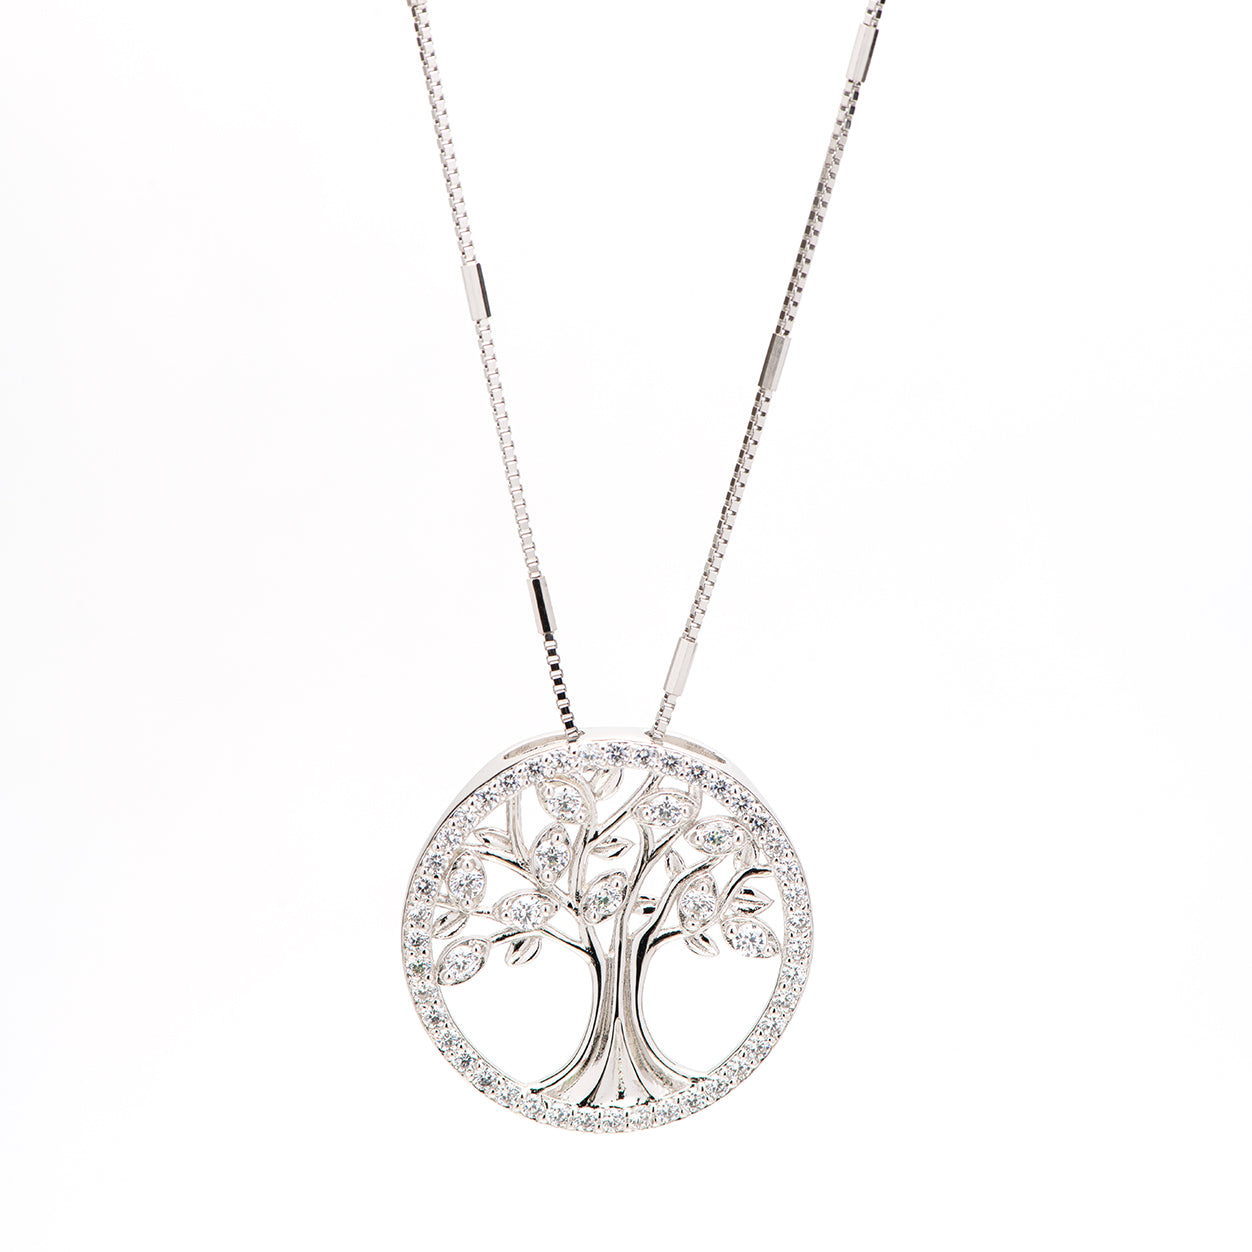 DK-925-435- Tree of life Necklace